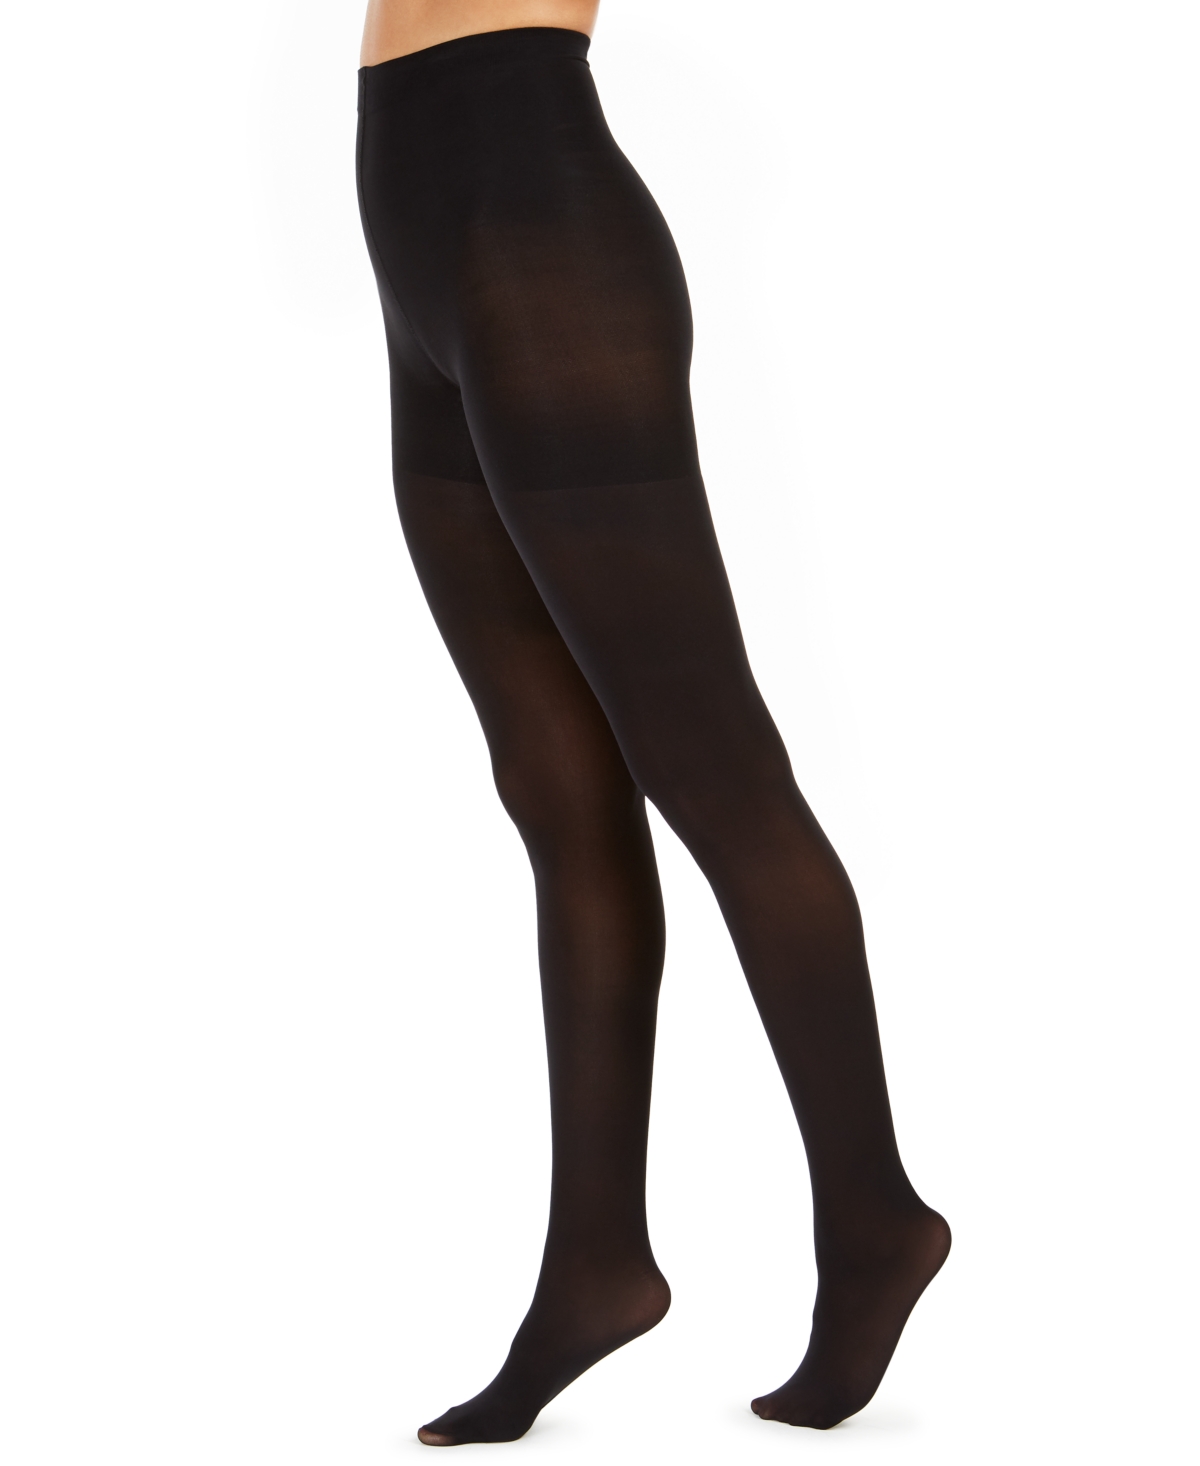 Women's Tight-End Tights - Very Black